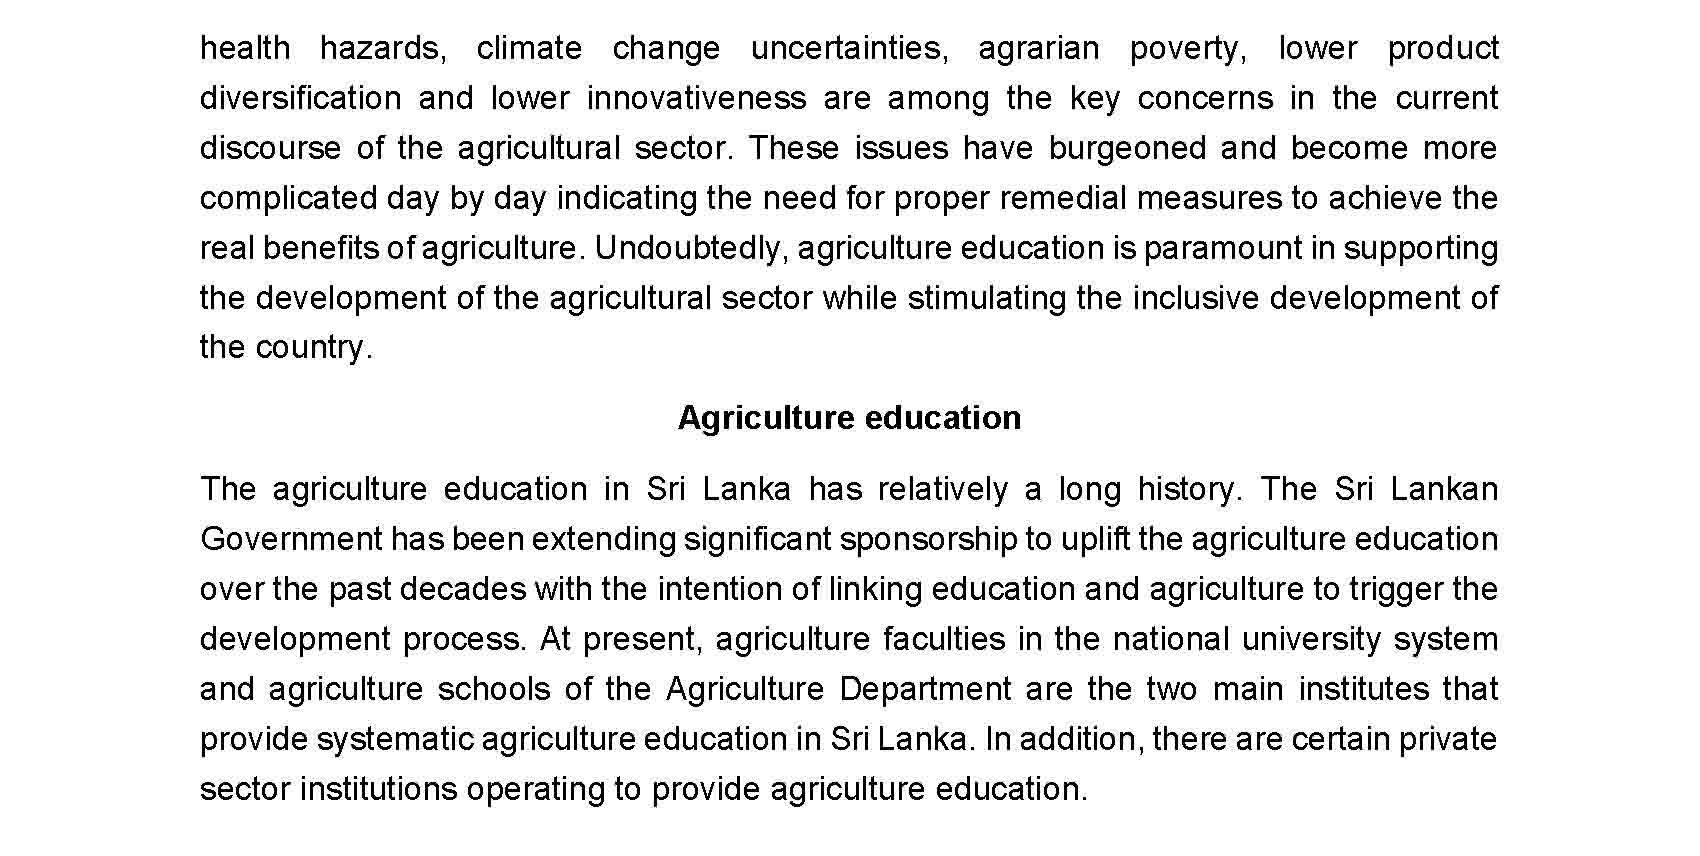 Motivating agriculture graduates with entrepreneurship opportunities Page 2